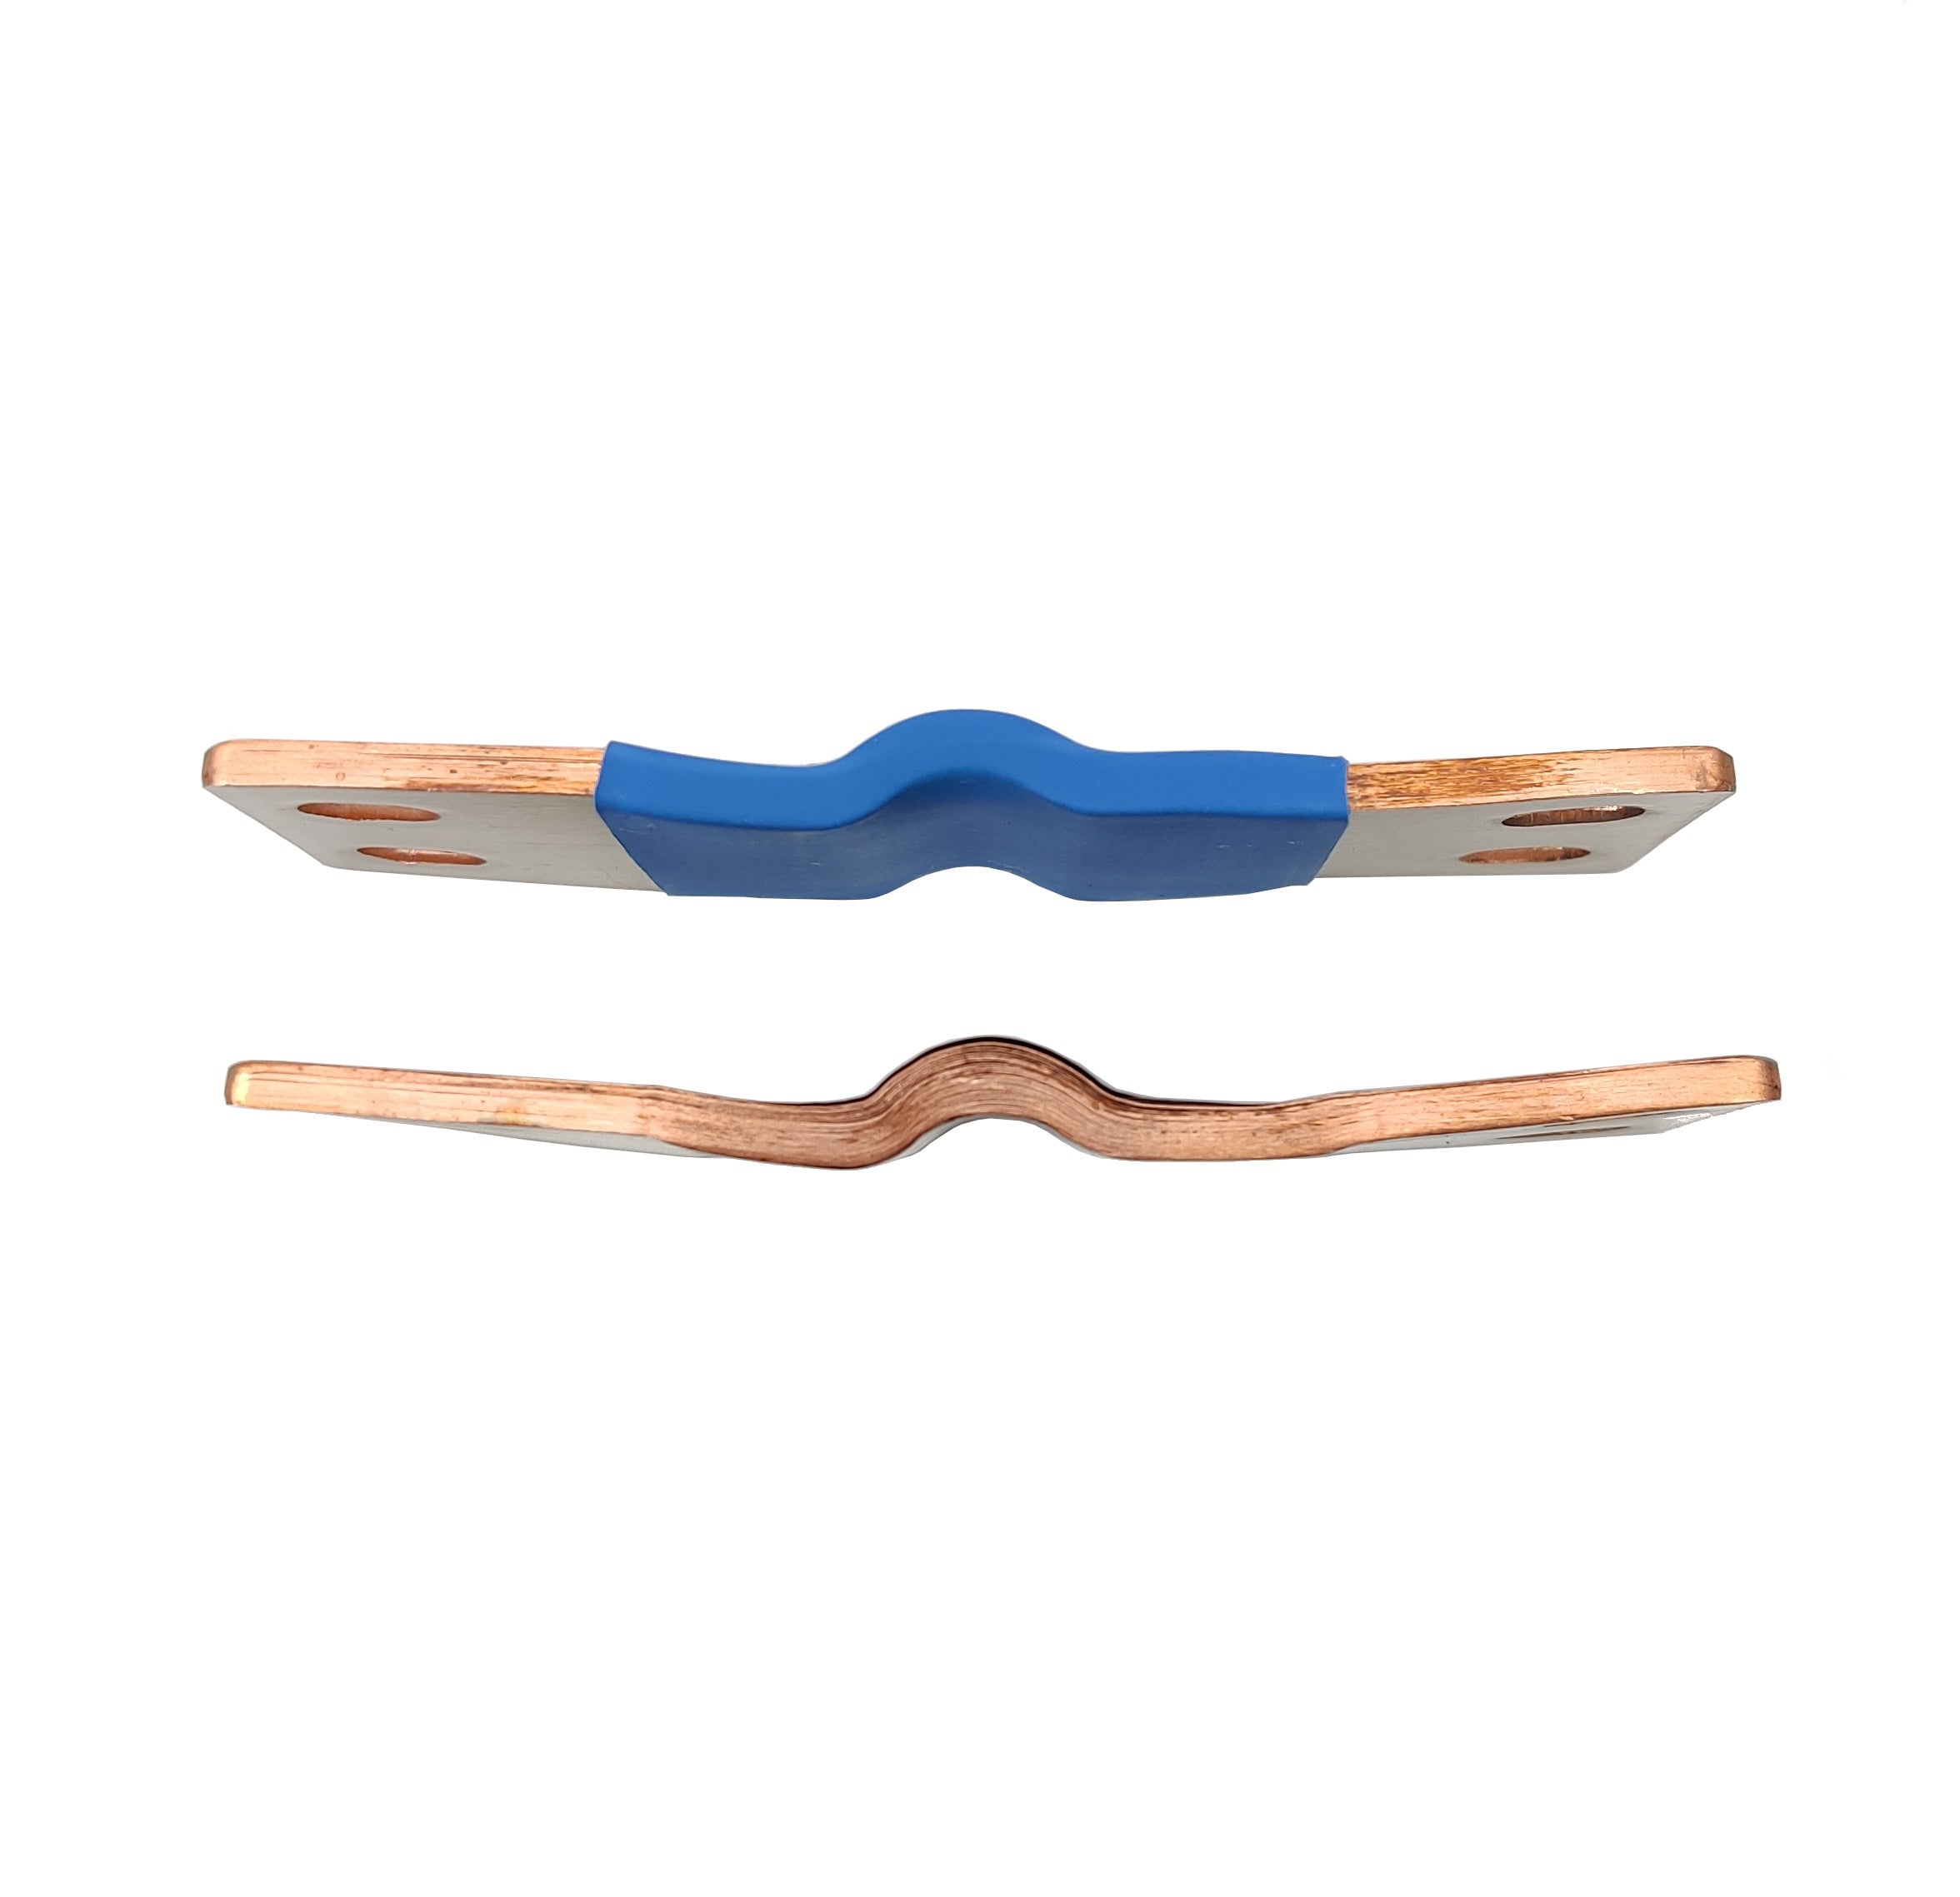 Copper connector 84mm with the finest flexible copper planes